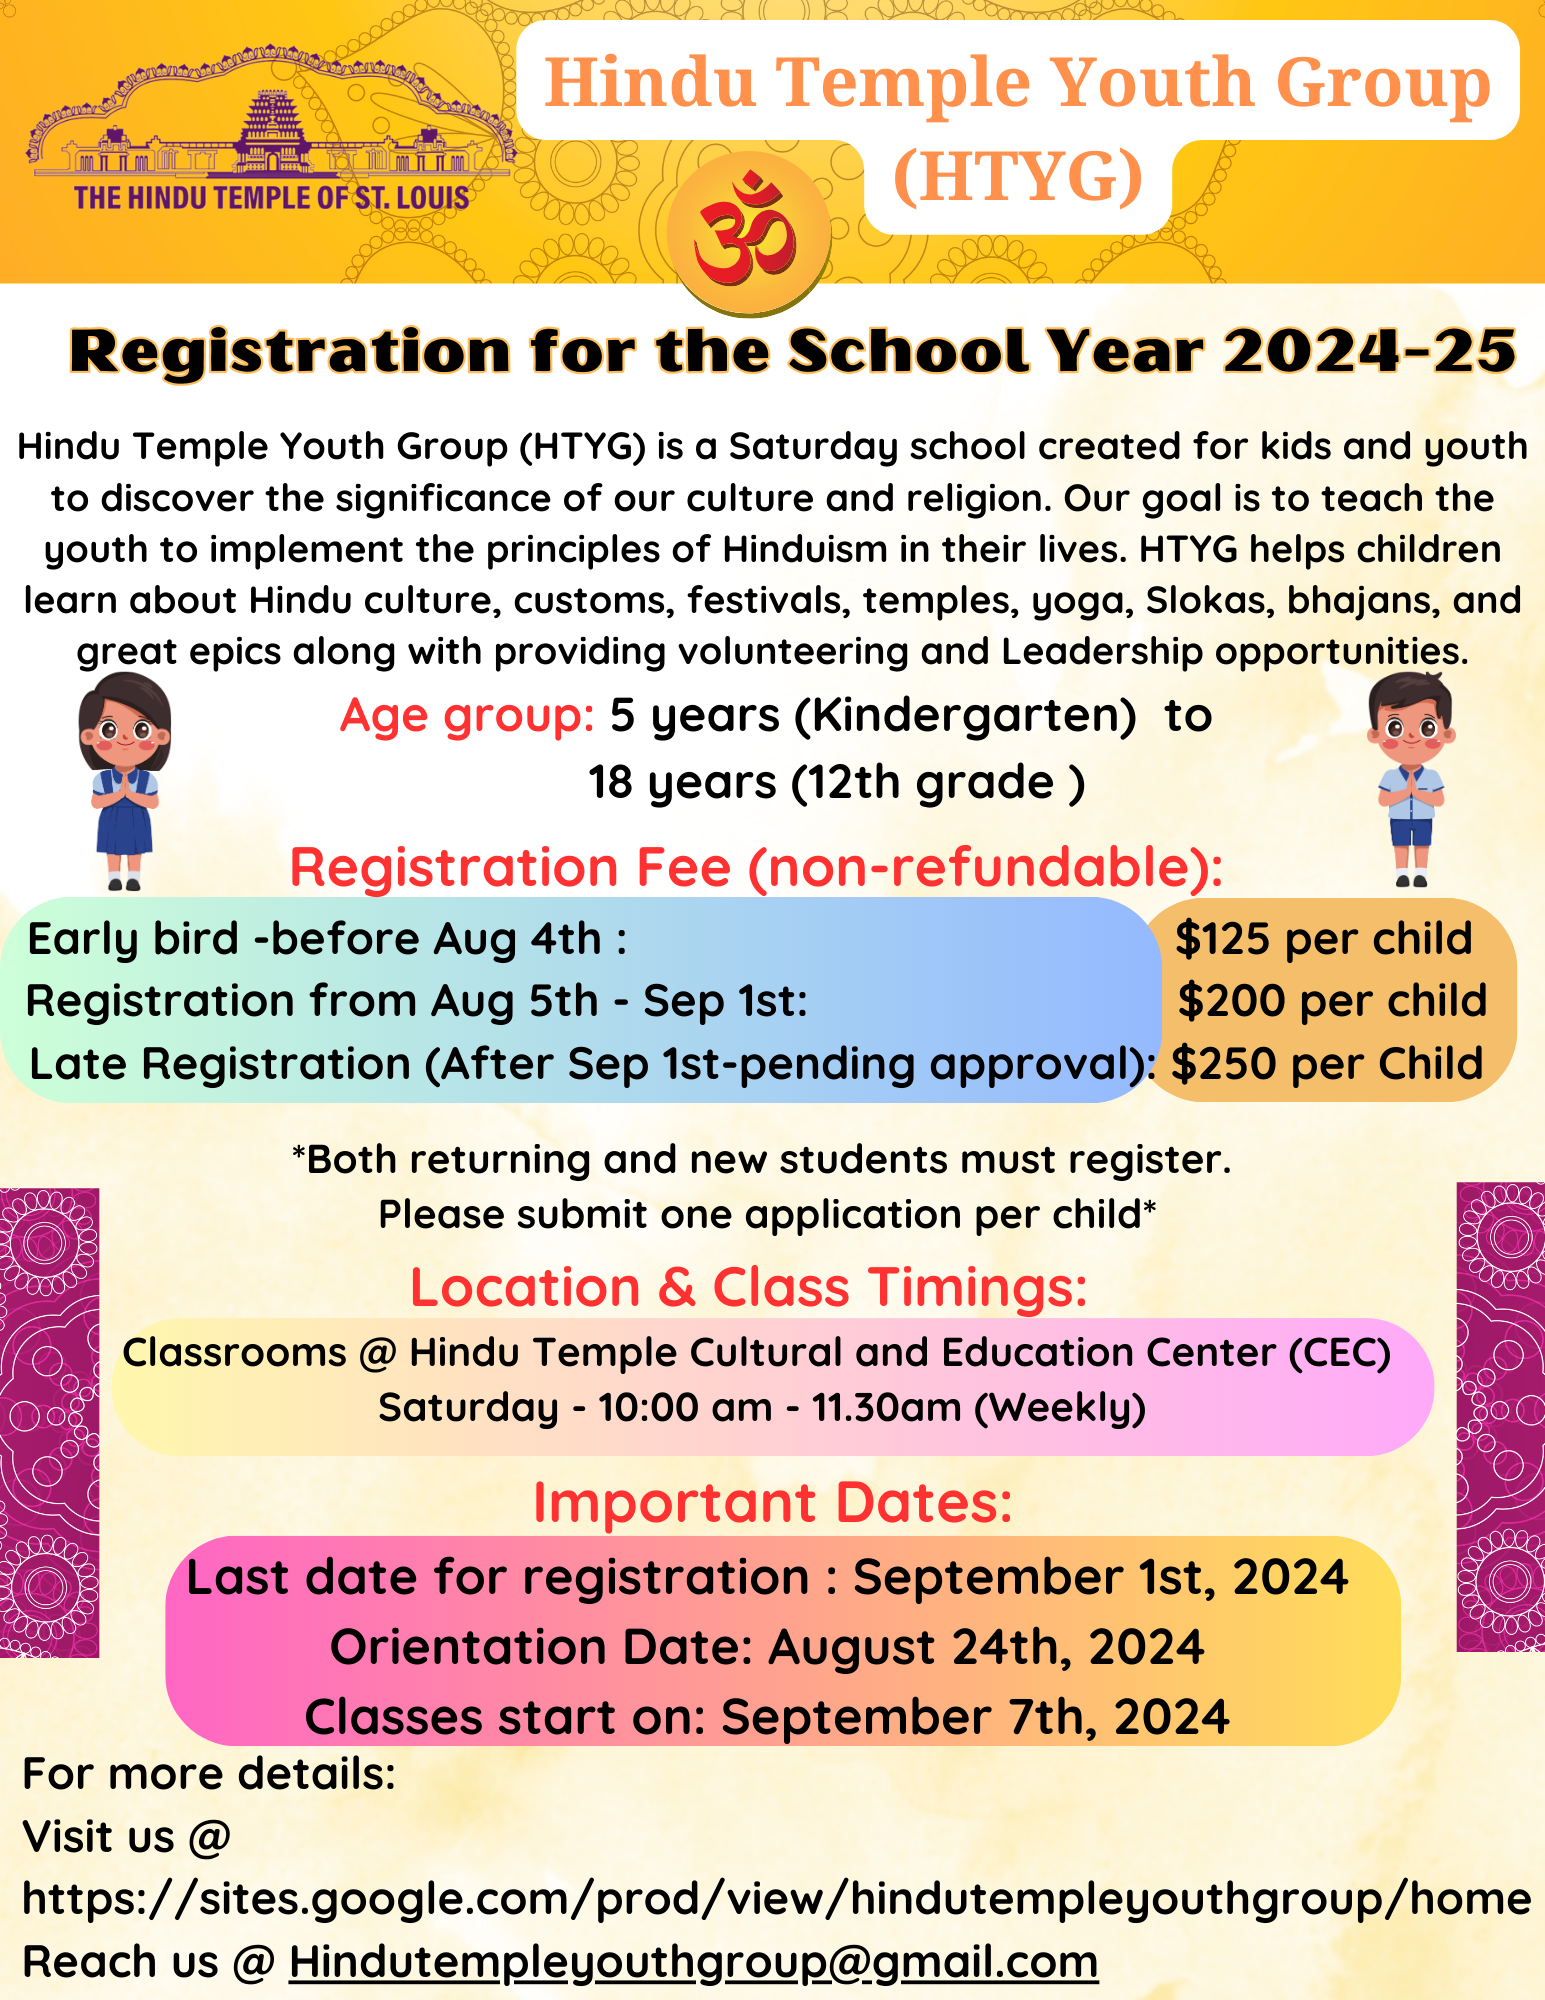 Hindu Temple Youth Group Registration 2024-25